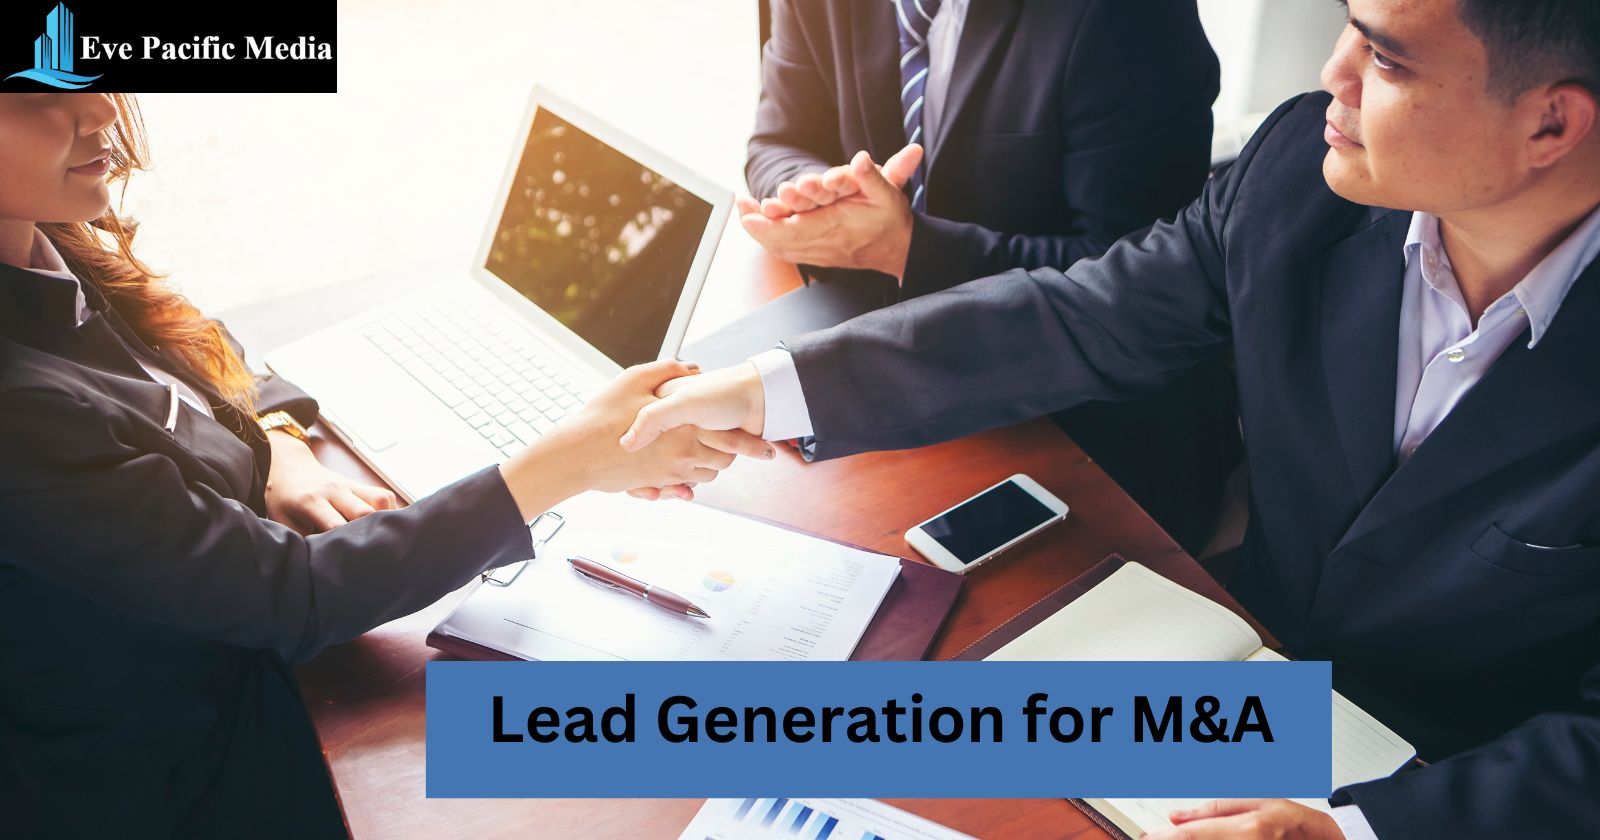 Lead generation for M&A